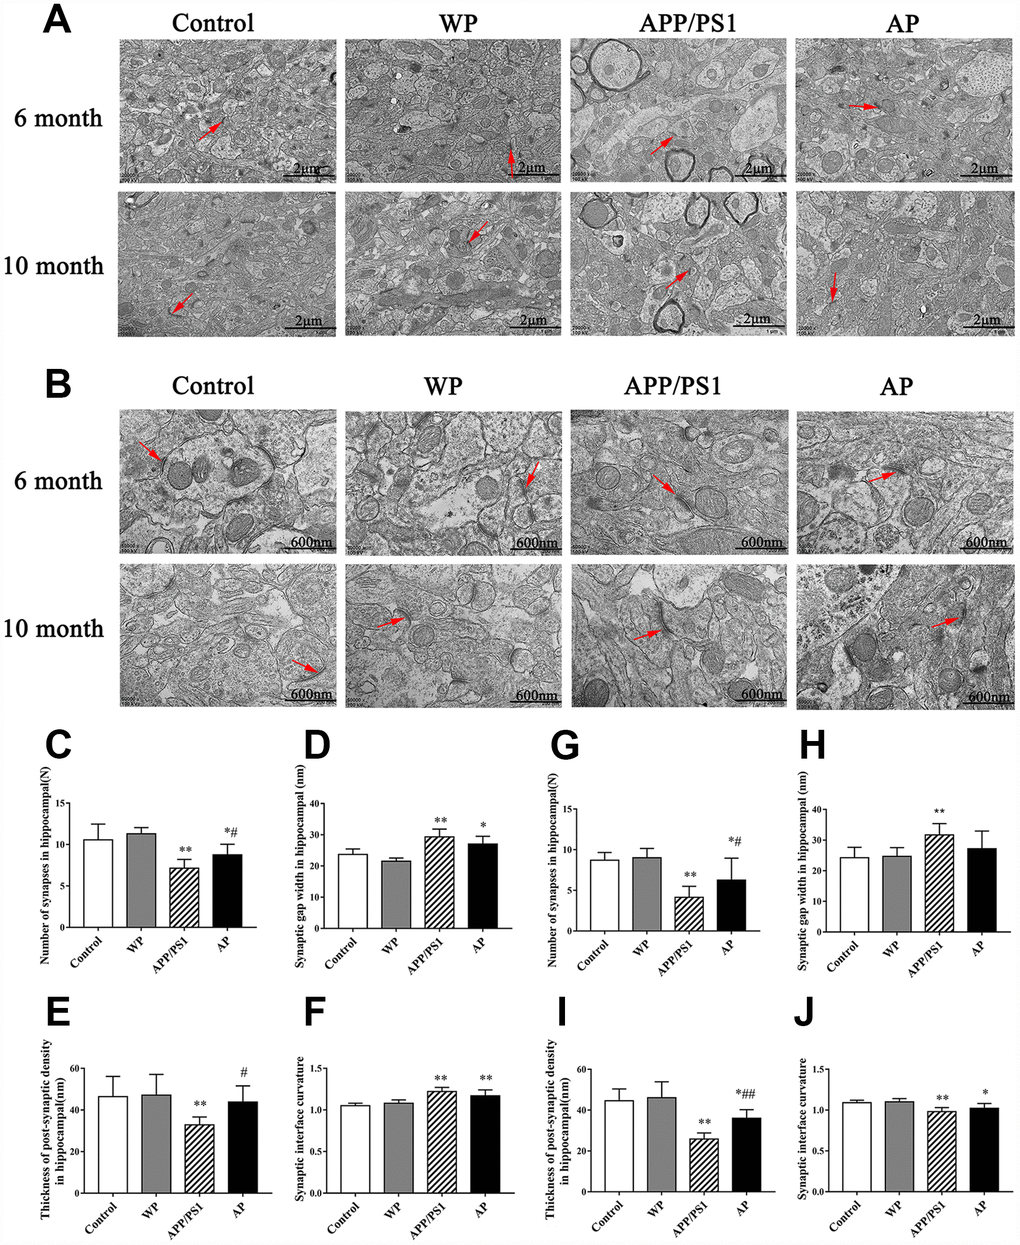 Activation of α7 nAChR increases the number of synapses and maintains the structural integrity of synapses in the hippocampus of APP/PS1